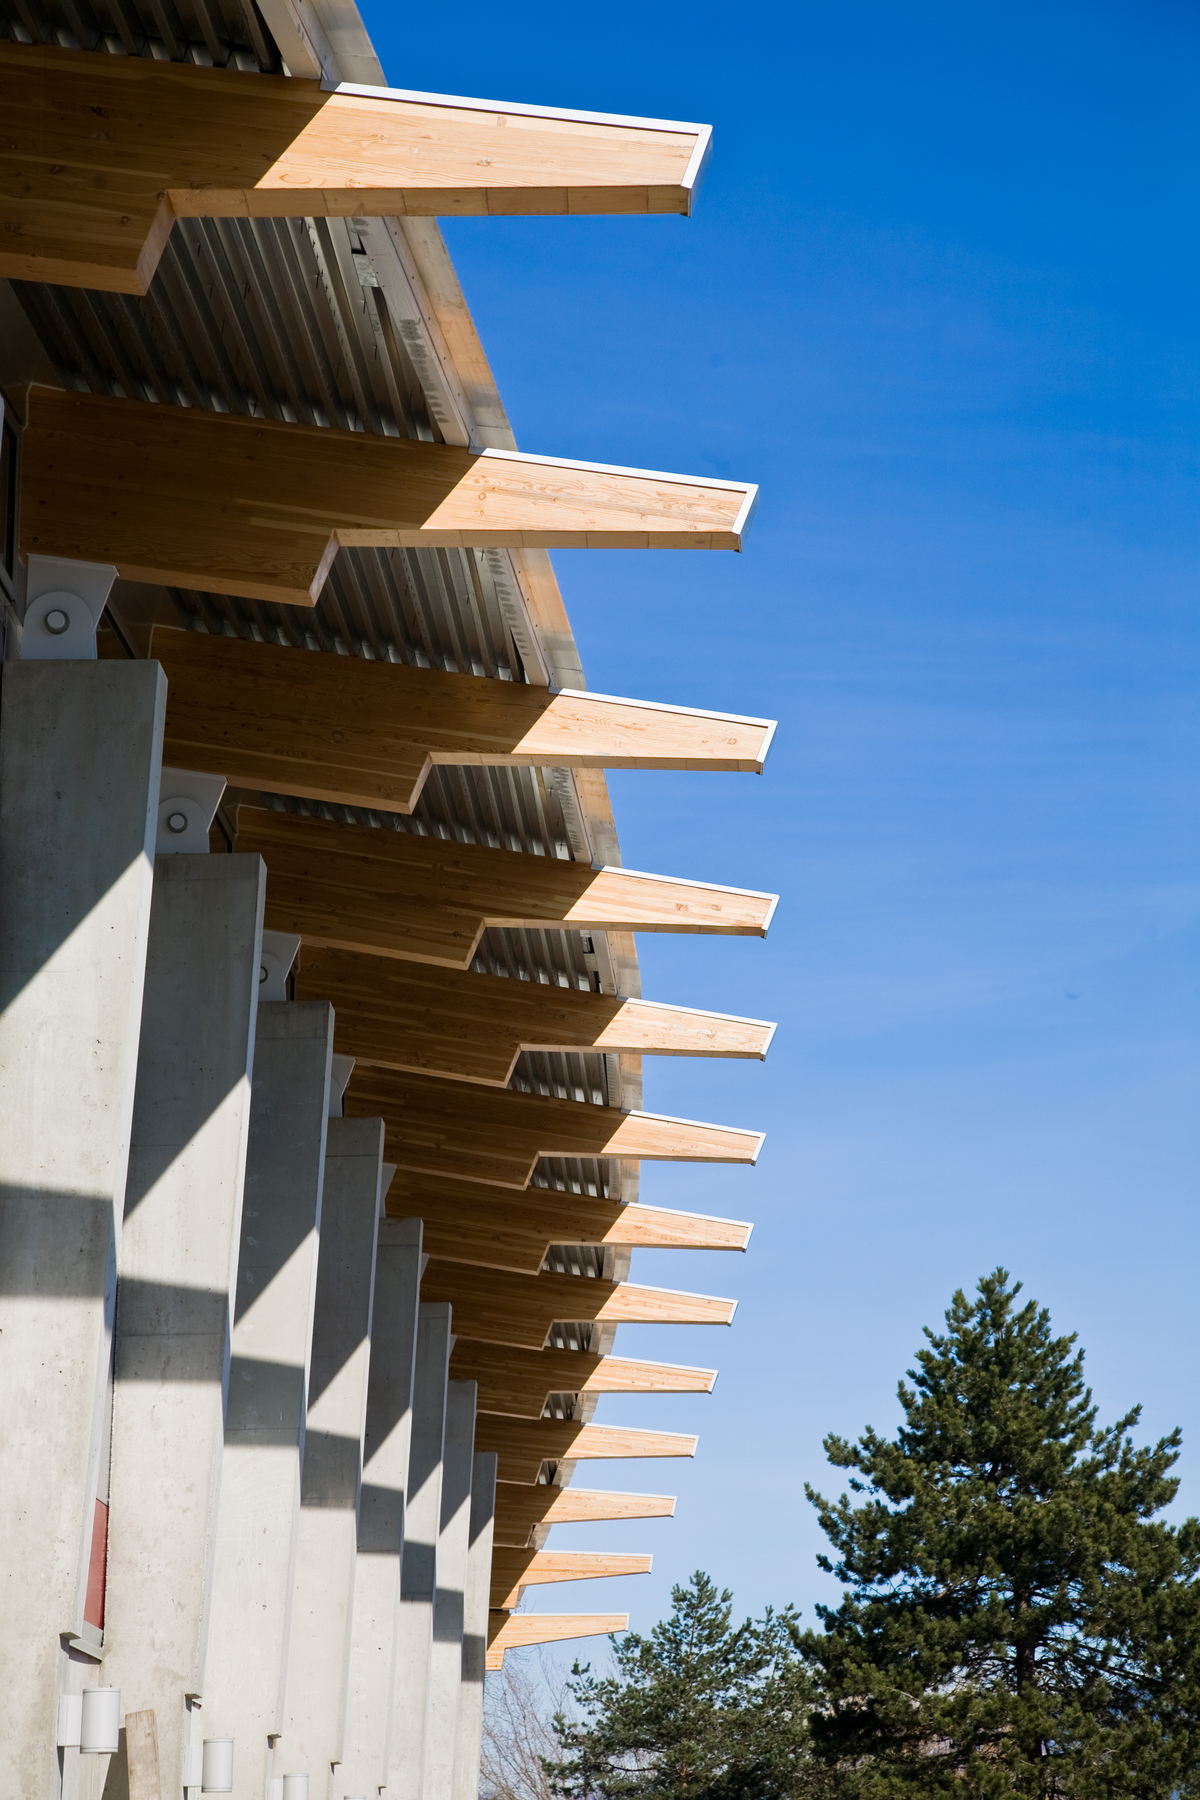 glue-laminated timber (Glulam) beams are shown supporting the arched roof of the hybrid low rise Trout Lake Ice Rink in this exterior daytime image